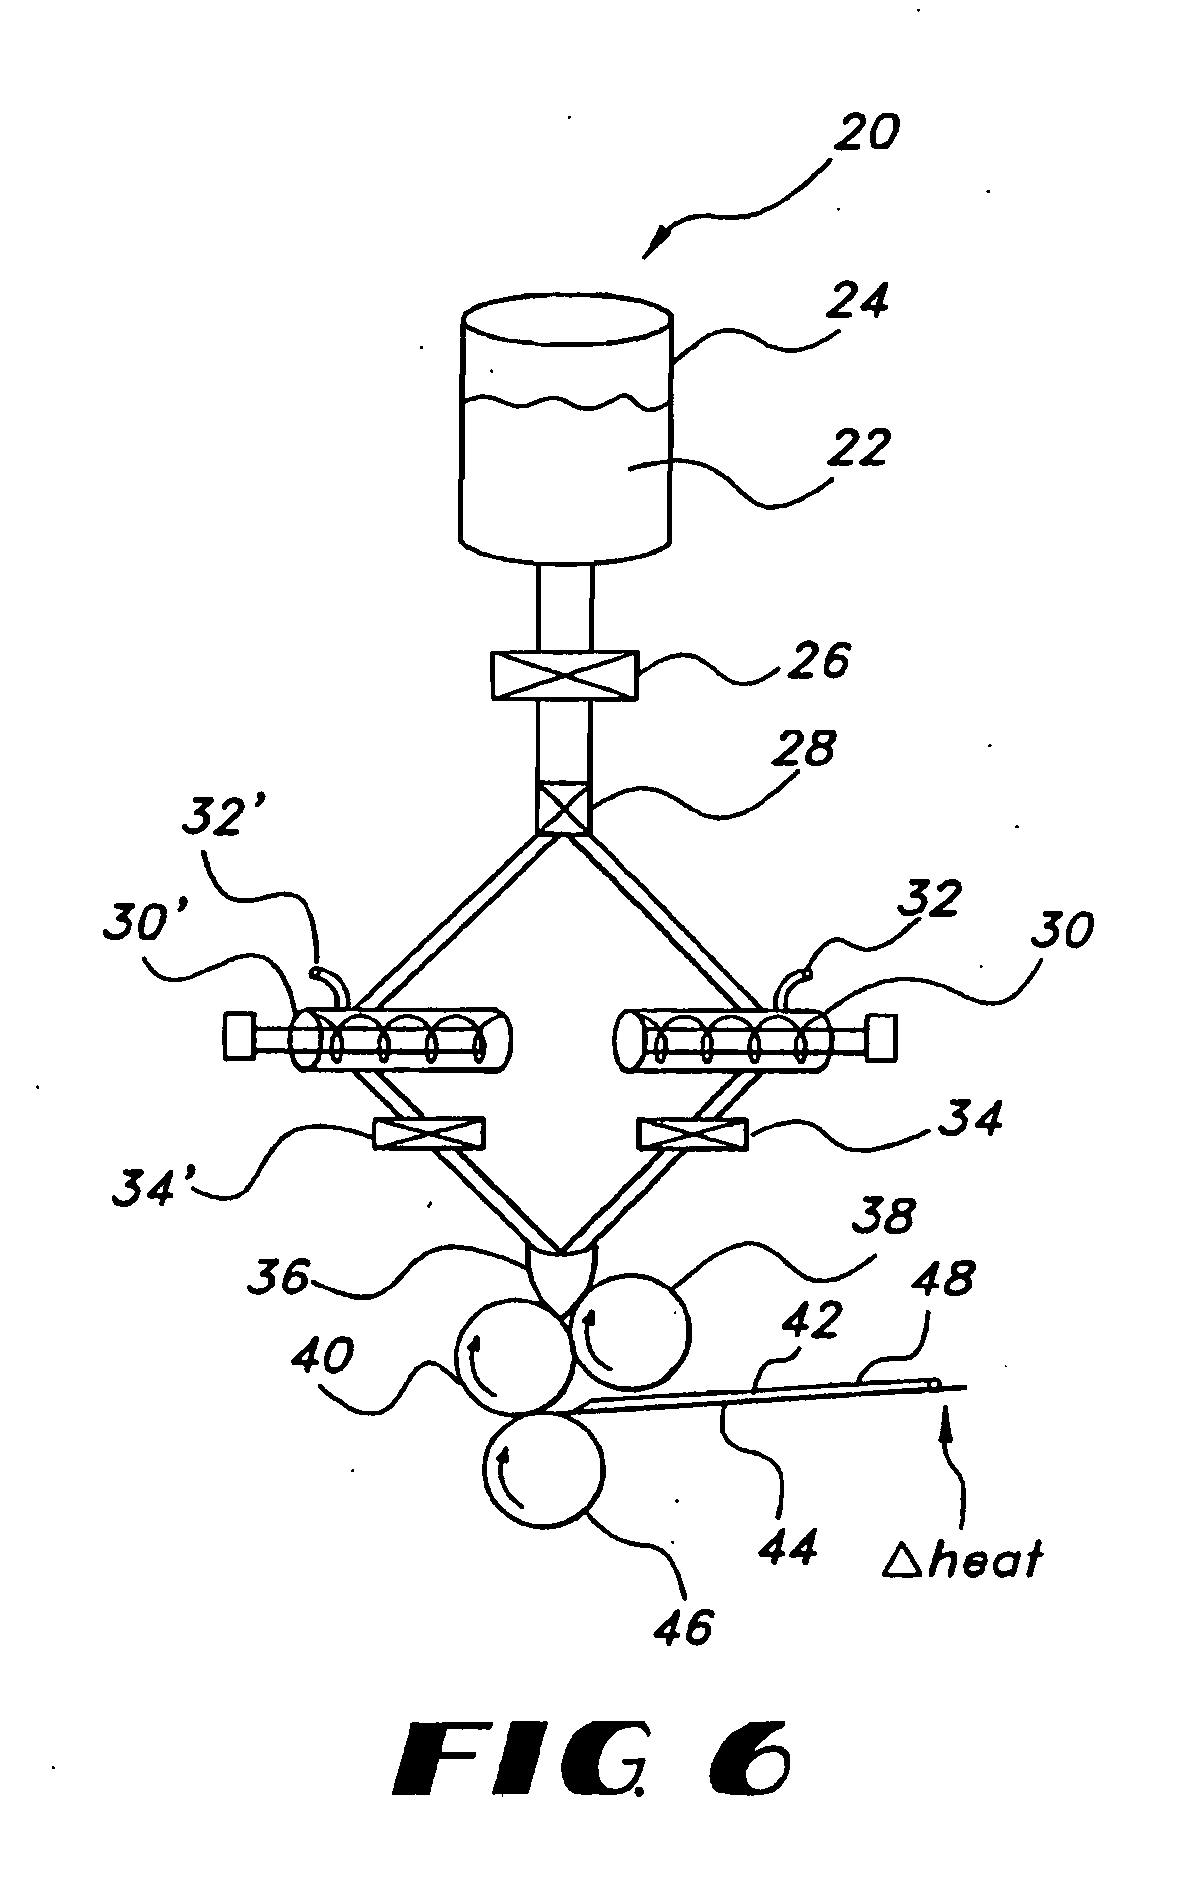 Uniform films for rapid-dissolve dosage form incorporating anti-tacking compositions